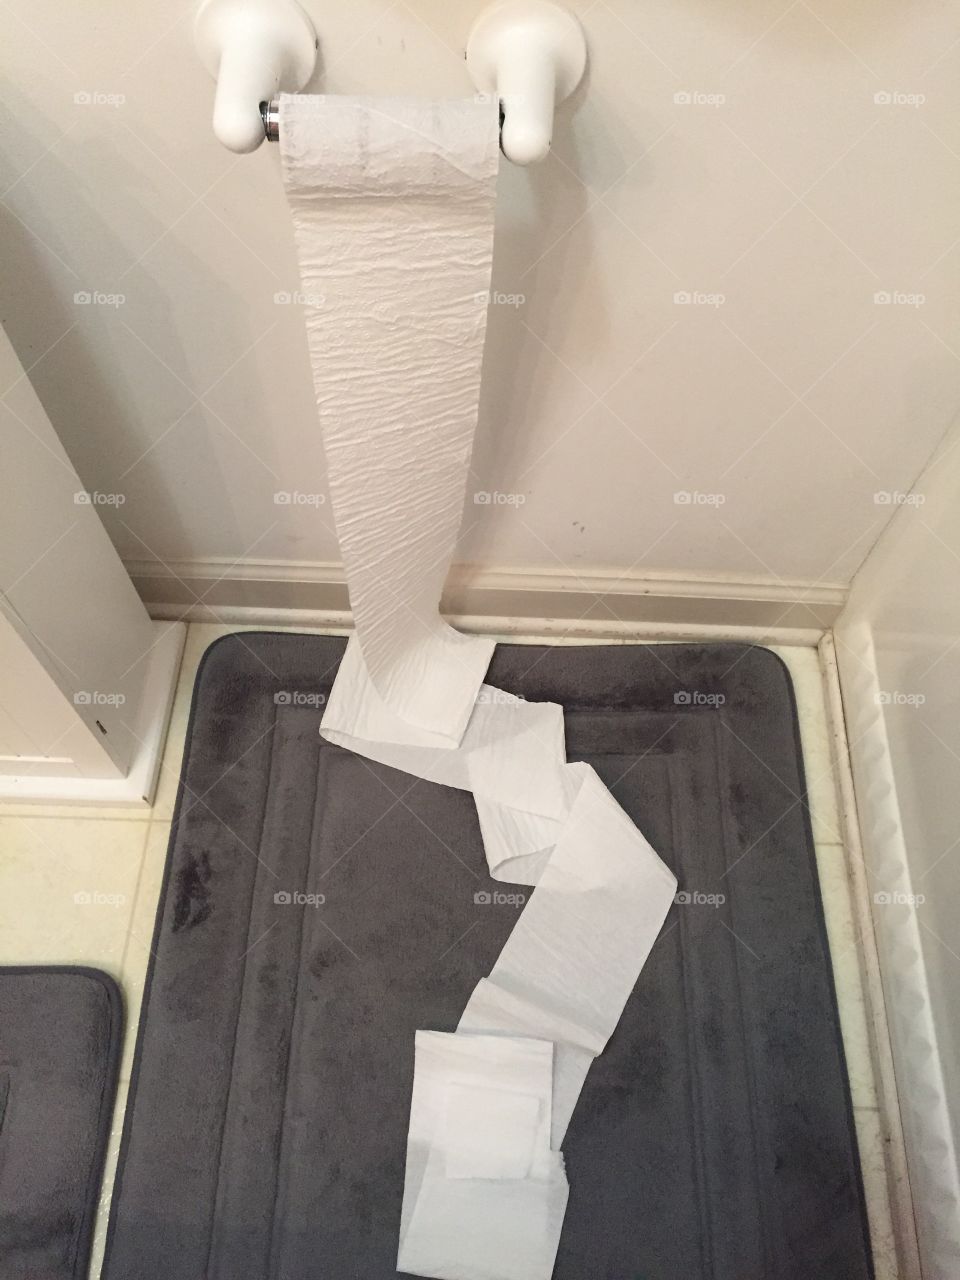 Toilet paper disappointment. 